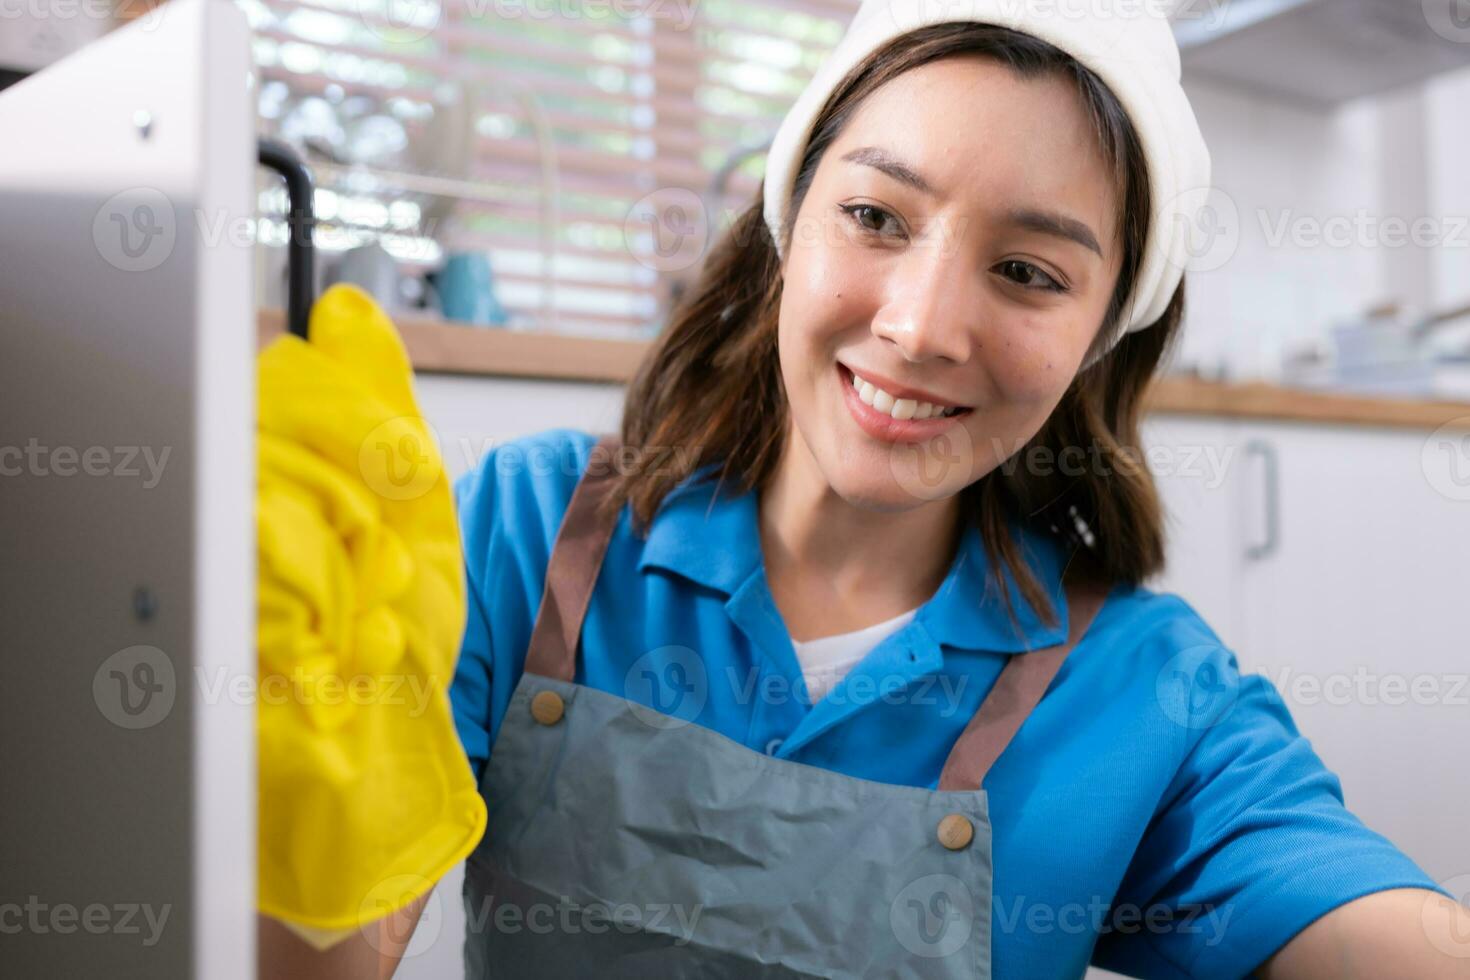 Smiling young woman in apron and cleaning gloves open kitchen cabinets photo